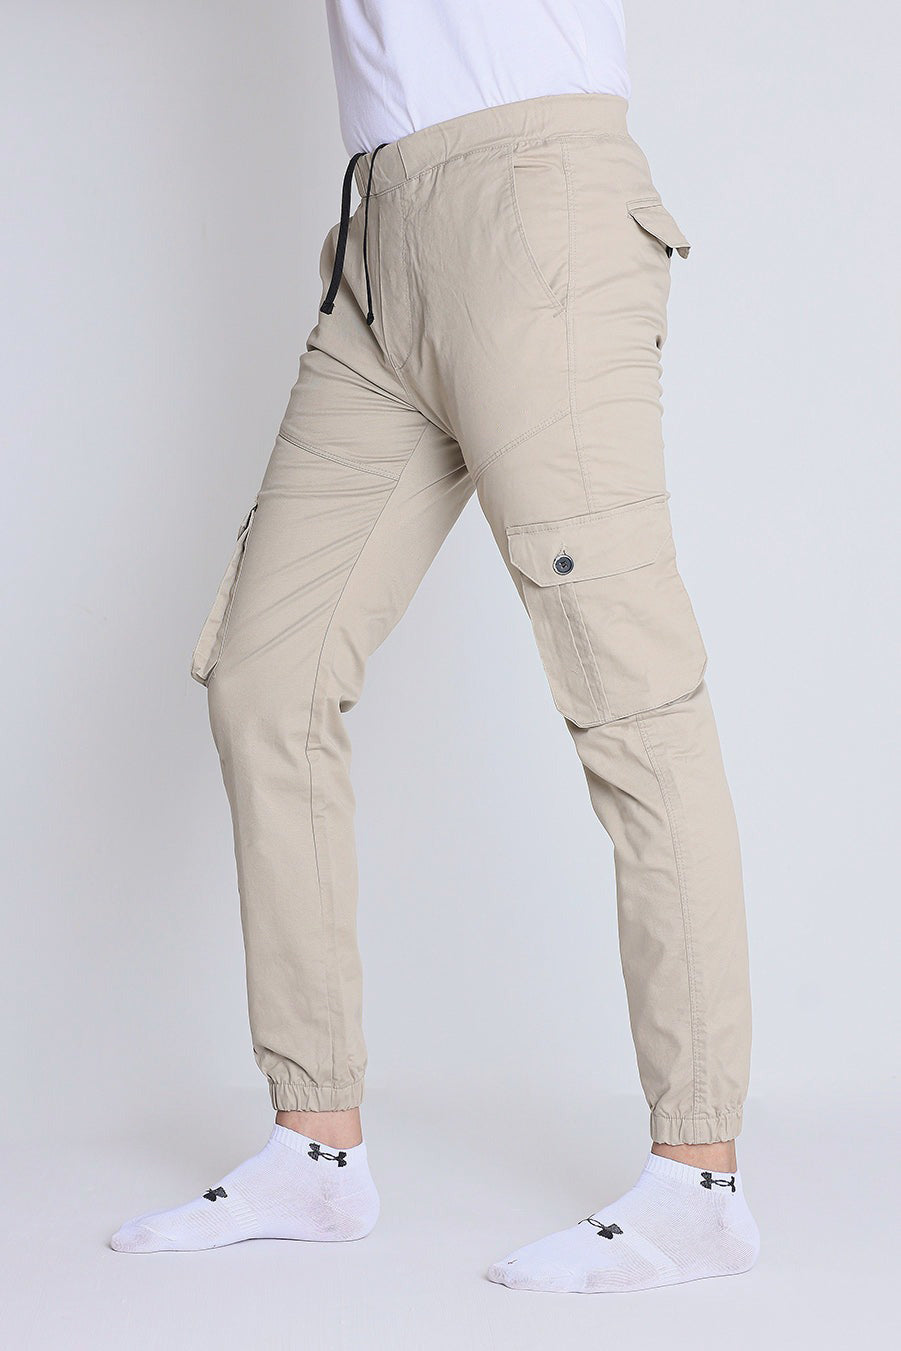 Buy Cotton Stretchable Cargo pants for men | Six Pockets| Tapered fit |  Ankle length| Neon zip (30, Cream) at Amazon.in